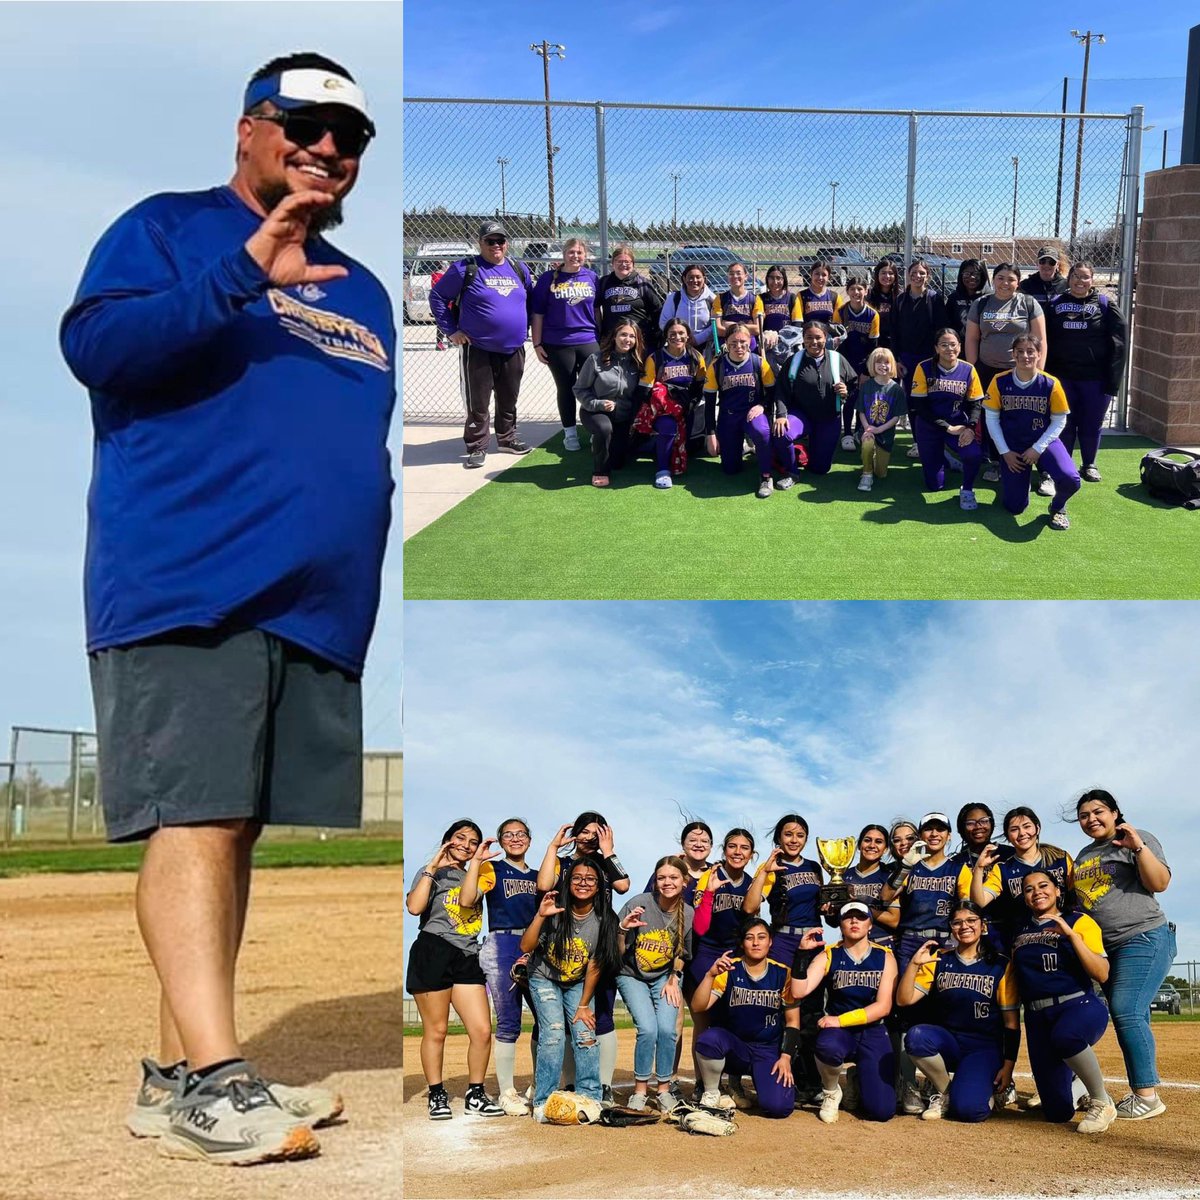 Andy Hershey is leaving as Head Coach of Crosbyton Softball to be the Head Softball Coach at Comfort. He did a terrific job at Crosbyton leading the team to back to back District Championships.